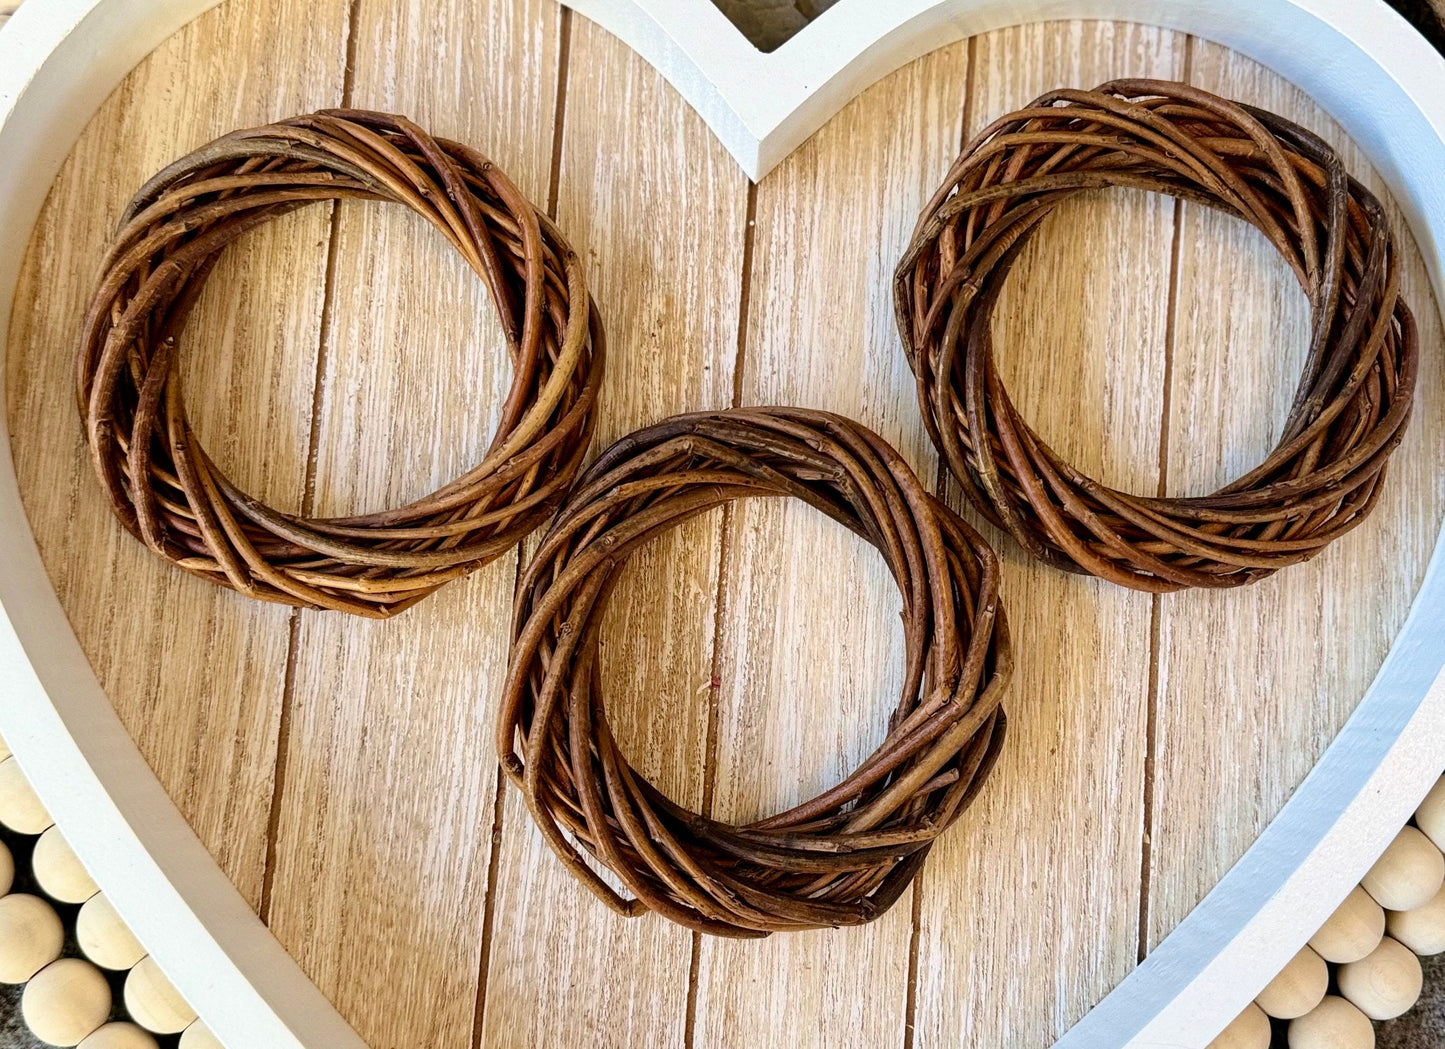 Willow Rings | Safe Toss Toy, Healthy, Natural Chew Toy for Rabbits, Chinchillas, Hamsters & Guinea Pigs, Enrichment Toy/Boredom Buster